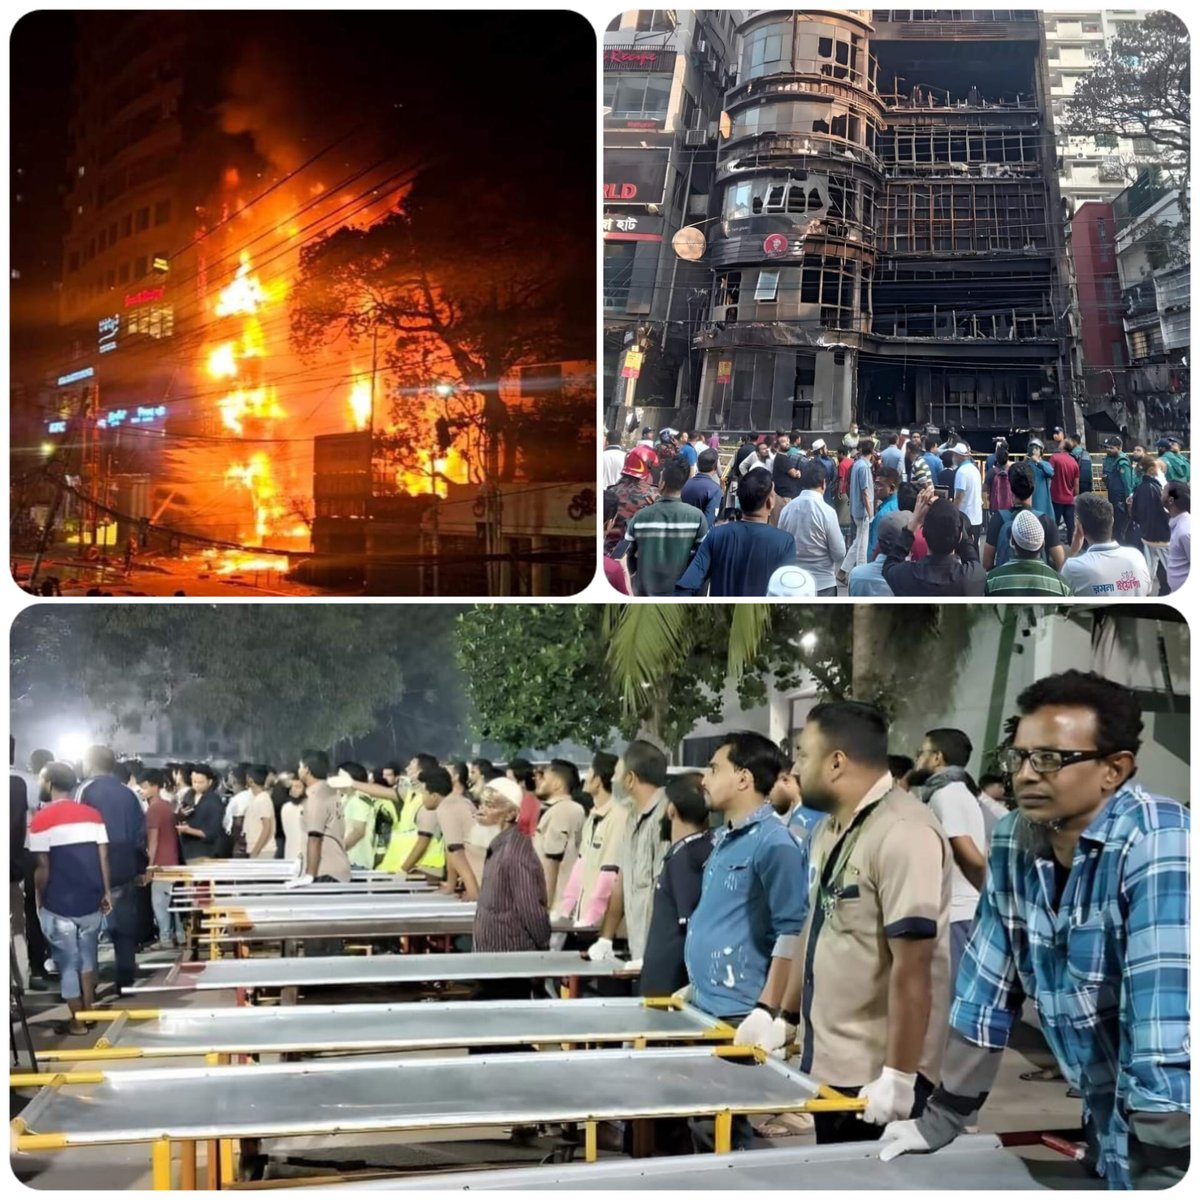 The loss of at least 45 lives in the Dhaka fire tragedy is heartbreaking. My deepest condolences to the affected families, and thoughts and prayers for everyone who has lost loved ones or had their lives turned upside down. With fires becoming more frequent in Bangladesh,…